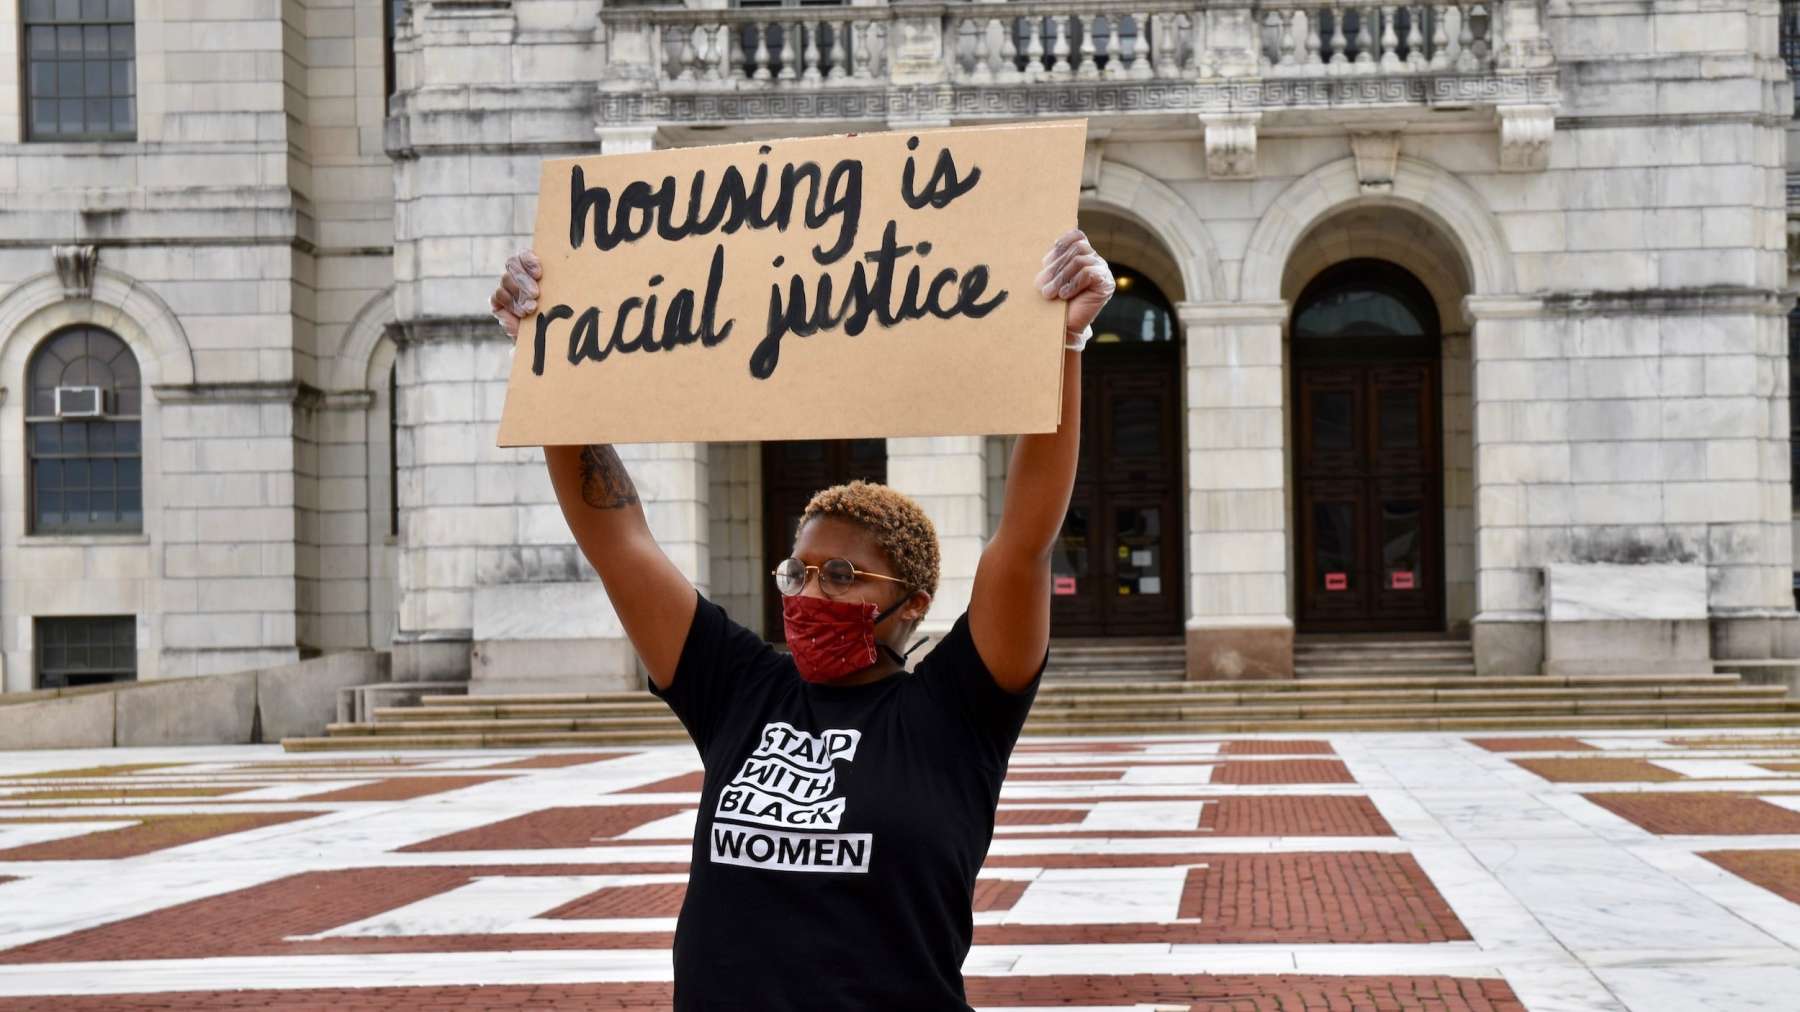 Rhode Island News: State House Rally calls for an eviction moratorium and rental assistance